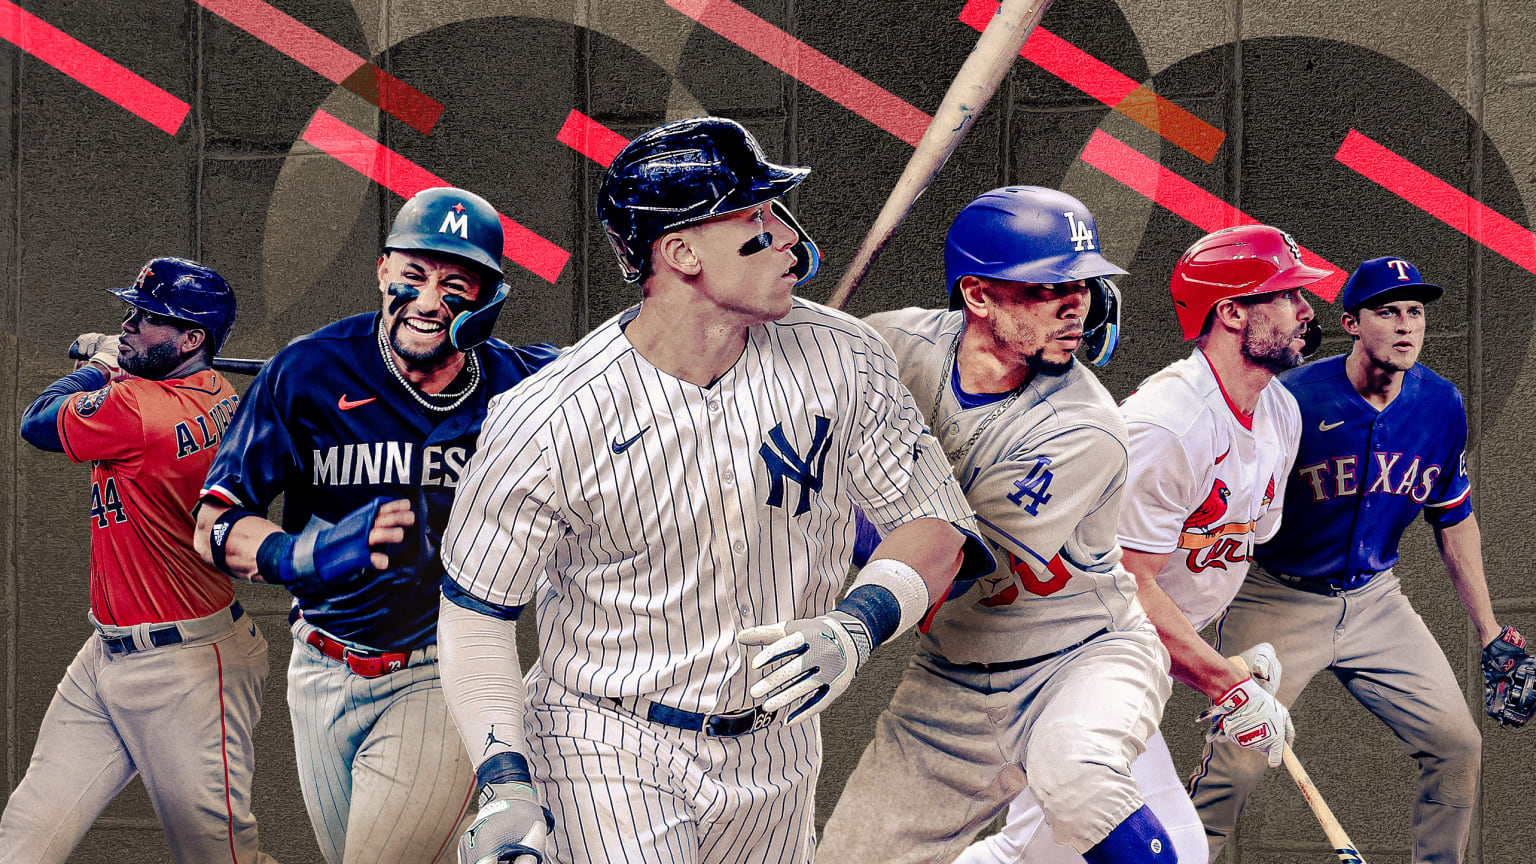 Designed image with six MLB stars in front of gray and red backdrop